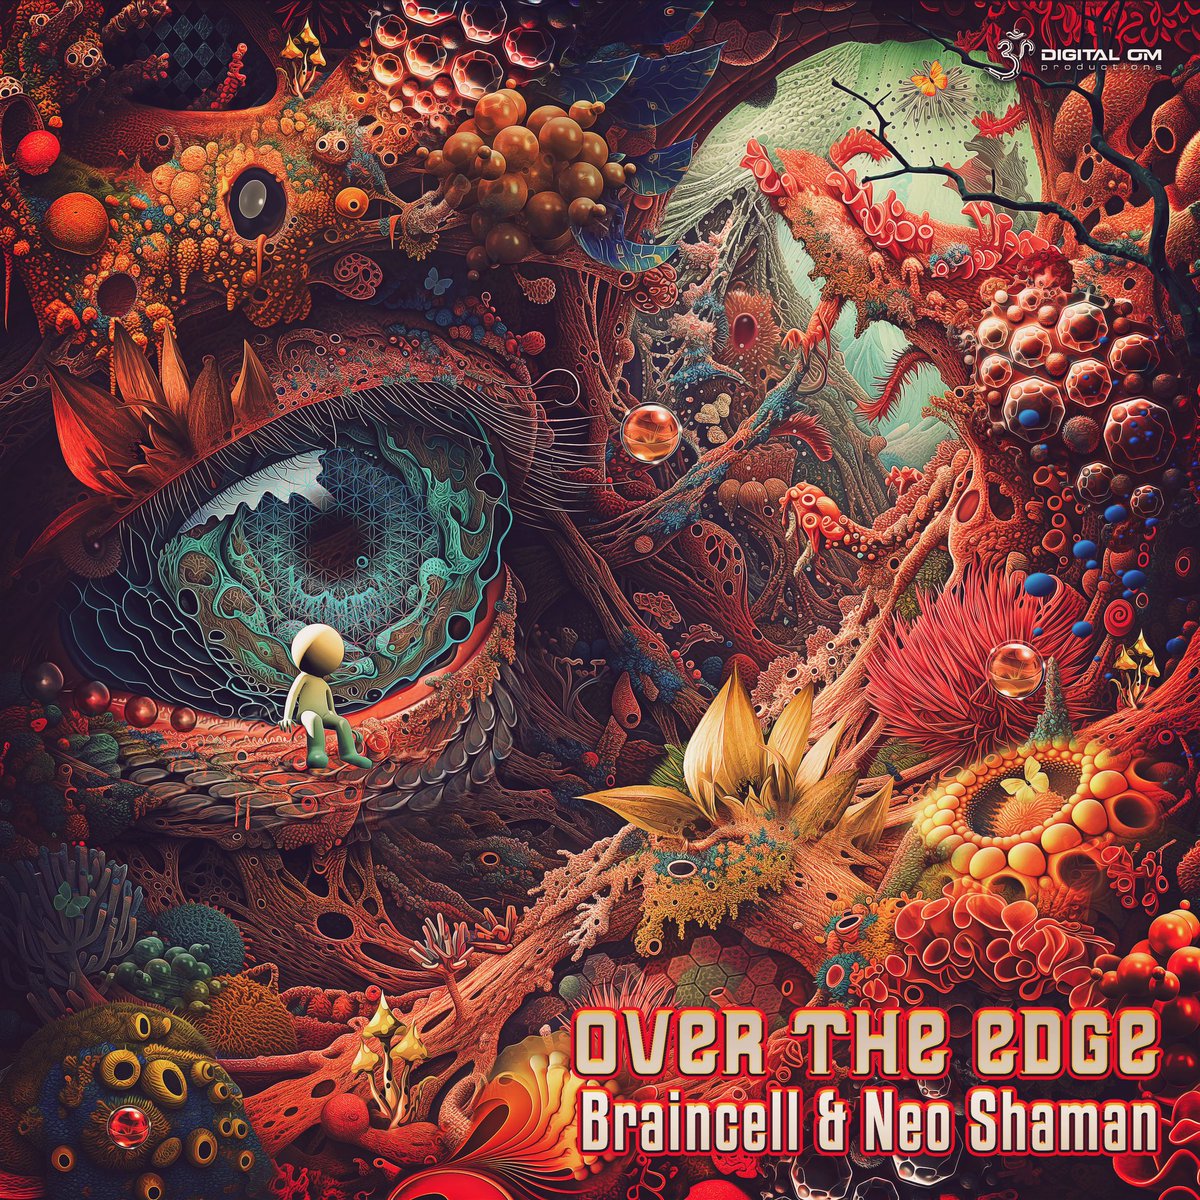 ”Greek emerging talent Neo Shaman hits the studio with Swiss legend Braincell to team up for sonic sorcery, pushing us ‘Over the Edge’.”
.
Stream now: hypeddit.com/braincellchneo…
.
#neoshamam #braincell #overtheedge #ilovefull #ravesbr #universoparalello #festivalcultural #digitalom